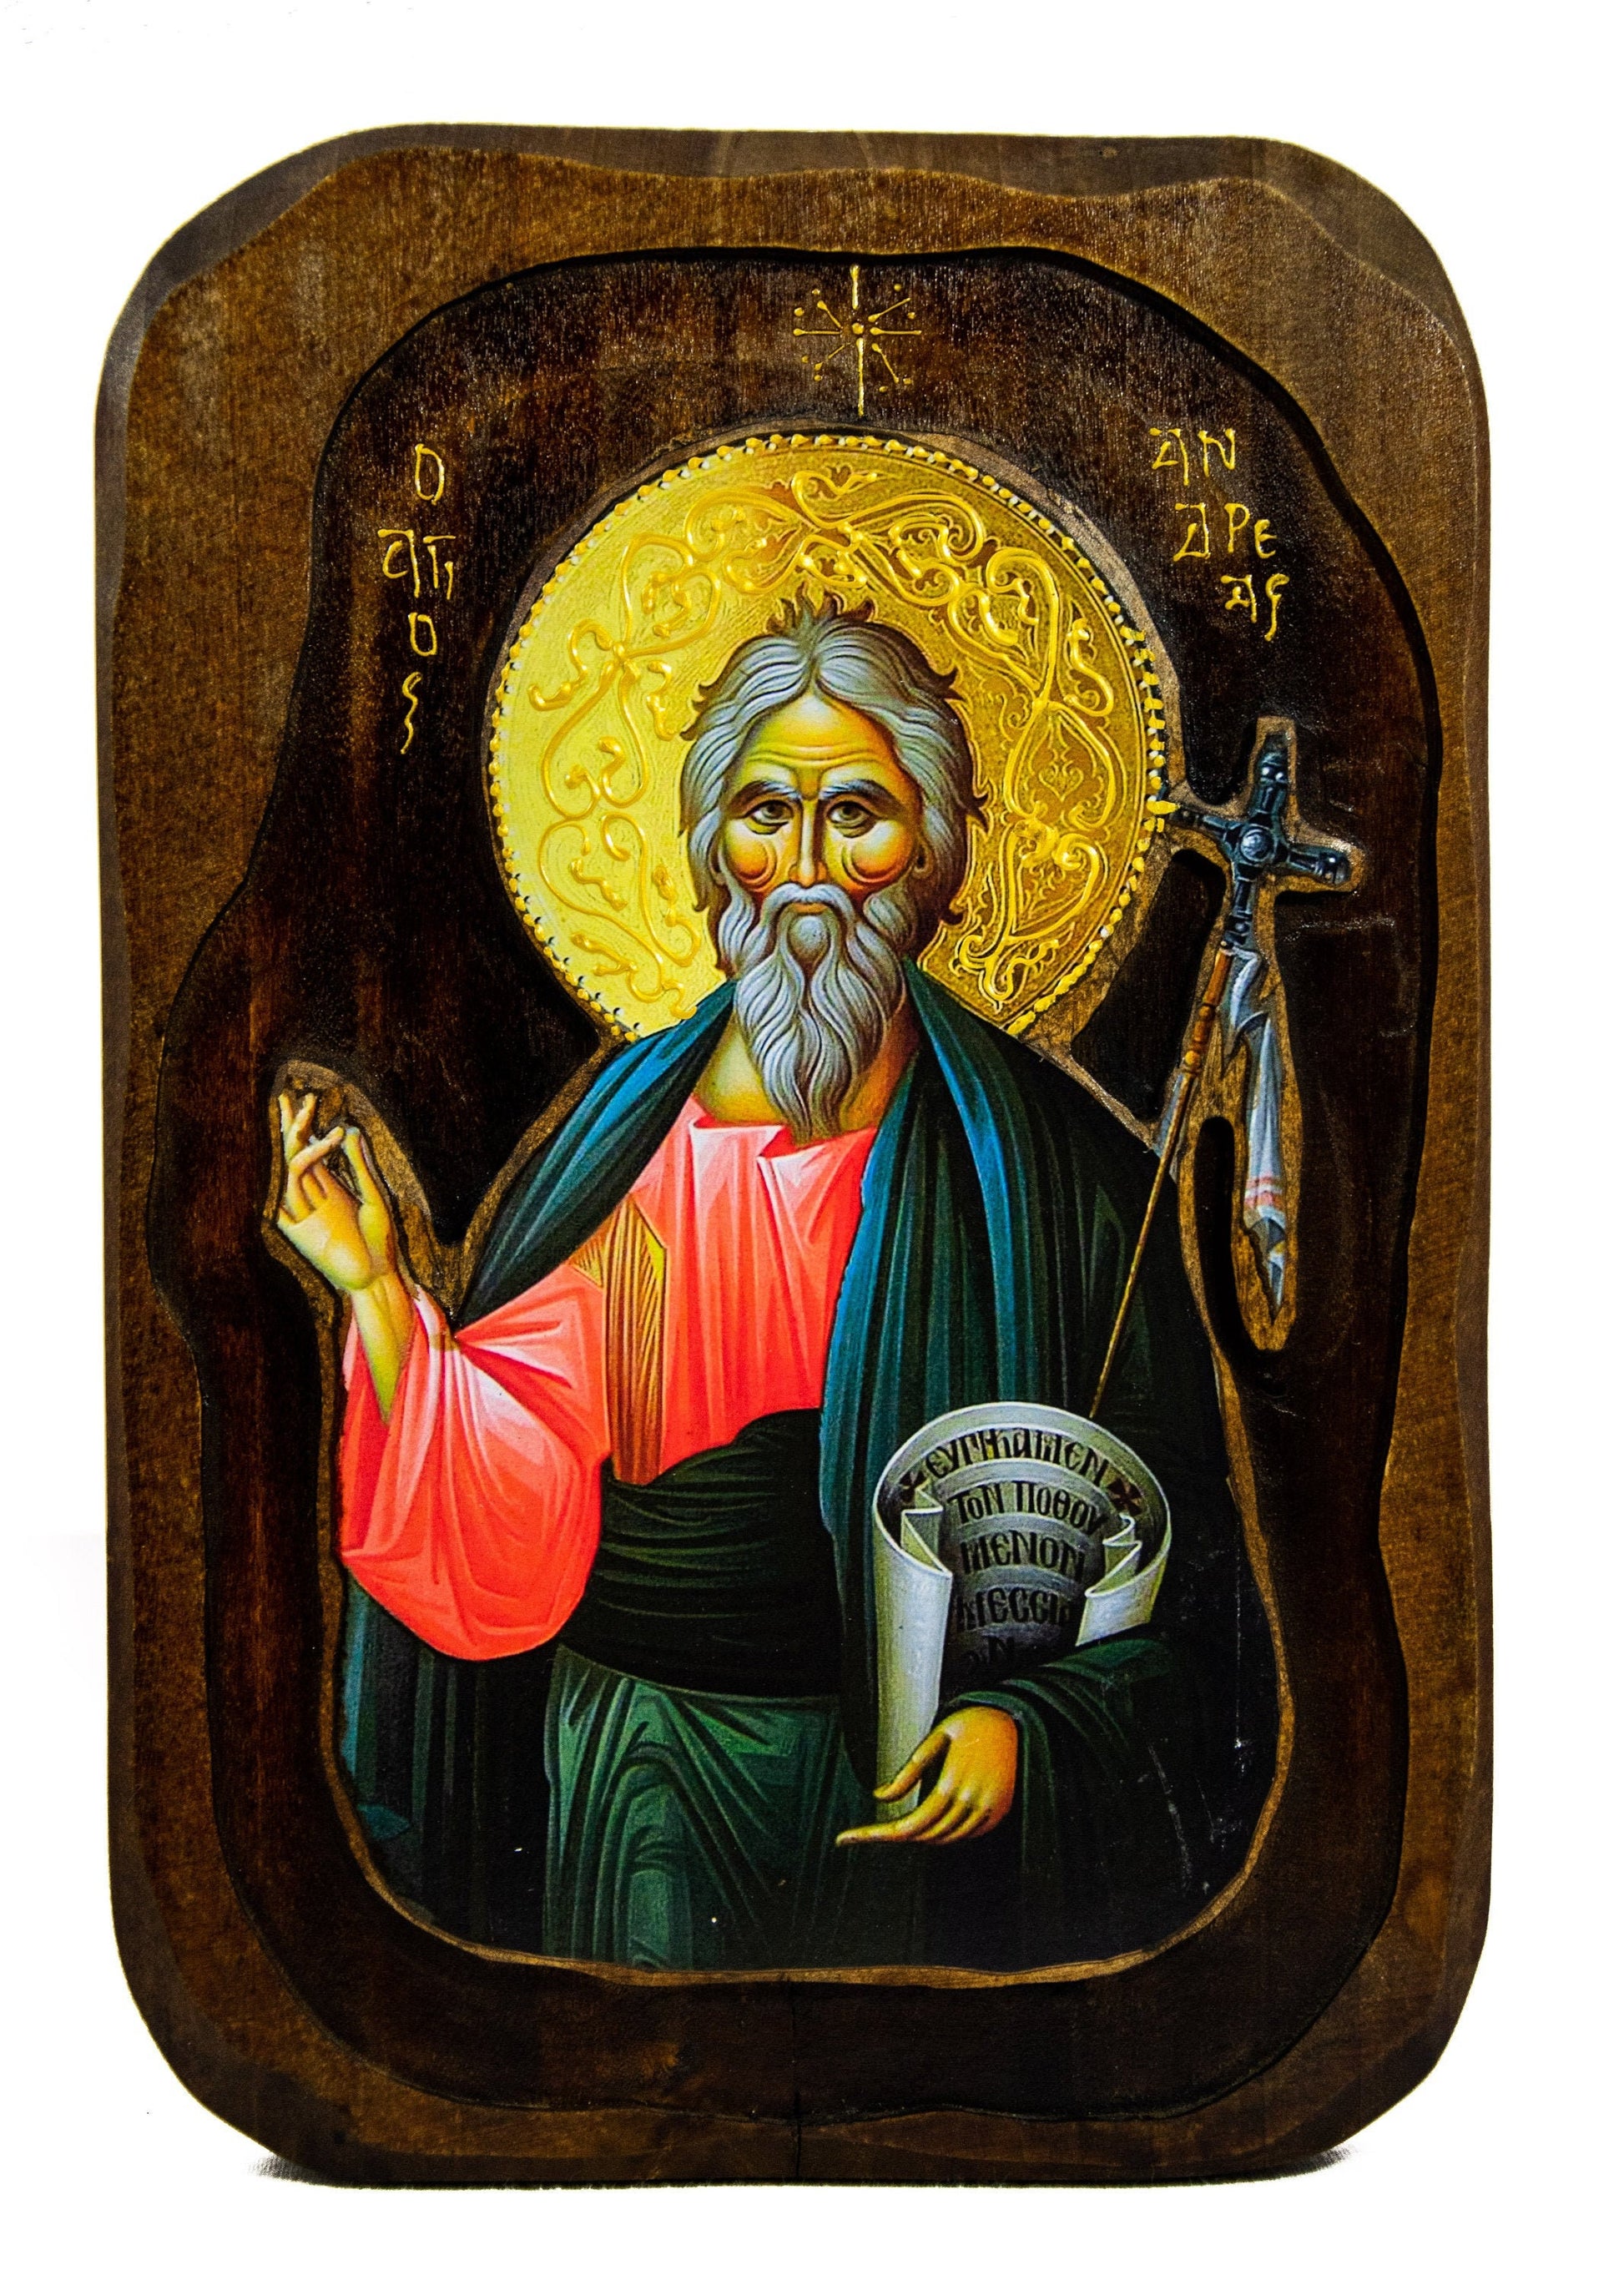 Saint Andrew icon the Apostle, Handmade Greek Orthodox icon of St Andrew, Byzantine art wall hanging wood plaque religious gift TheHolyArt